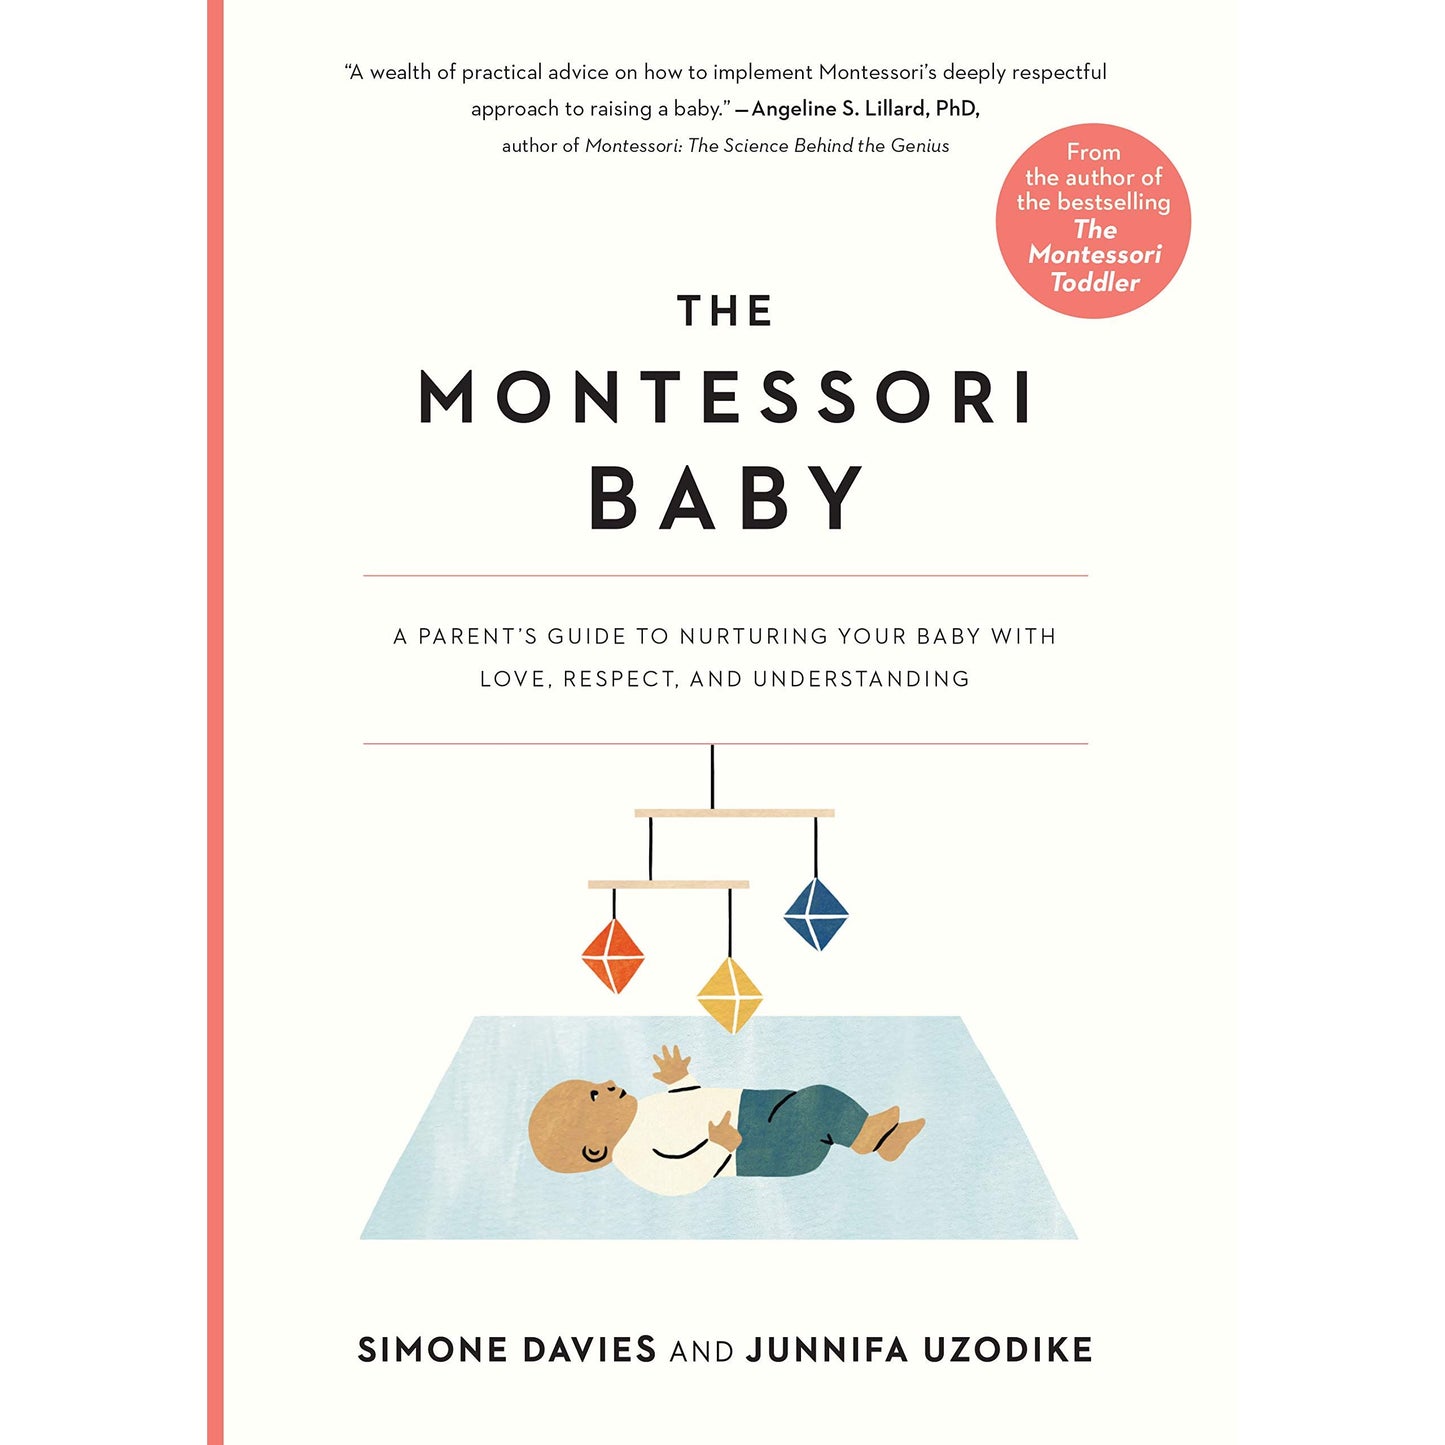 he Montessori Baby: A Parent's Guide to Nurturing Your Baby with Love, Respect, and Understanding